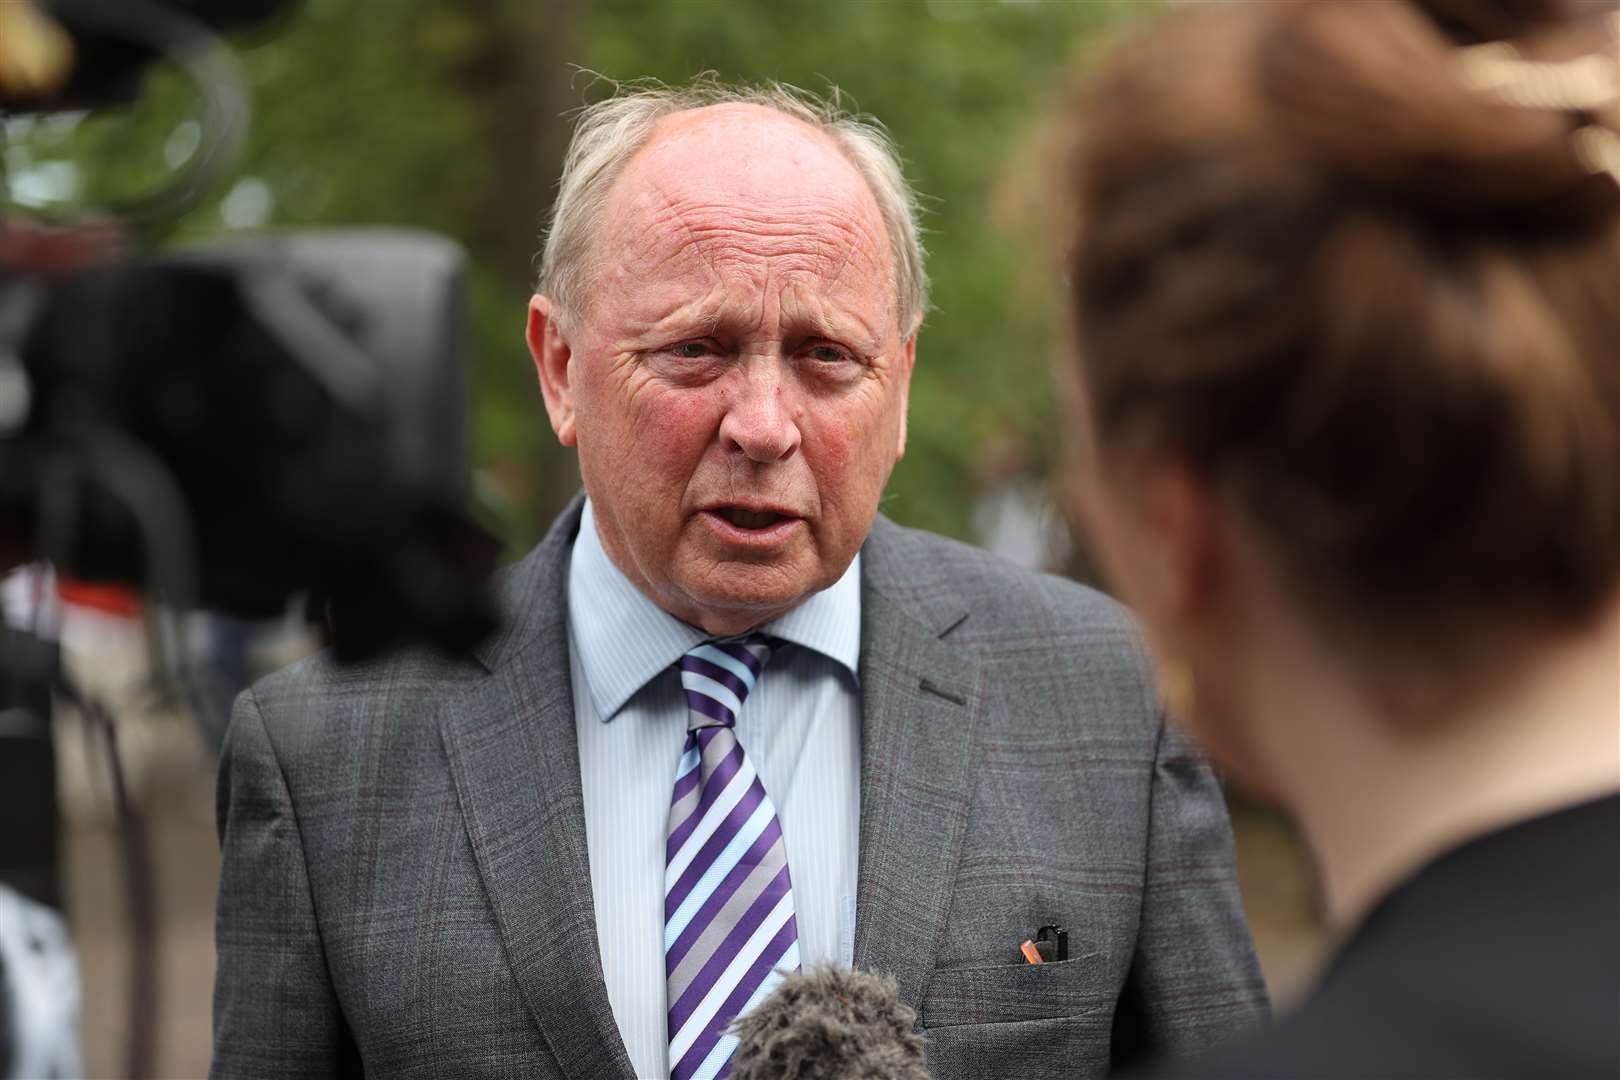 Traditional Unionist Voice leader Jim Allister has told the DUP to hold firm and maintain its boycott (PA).